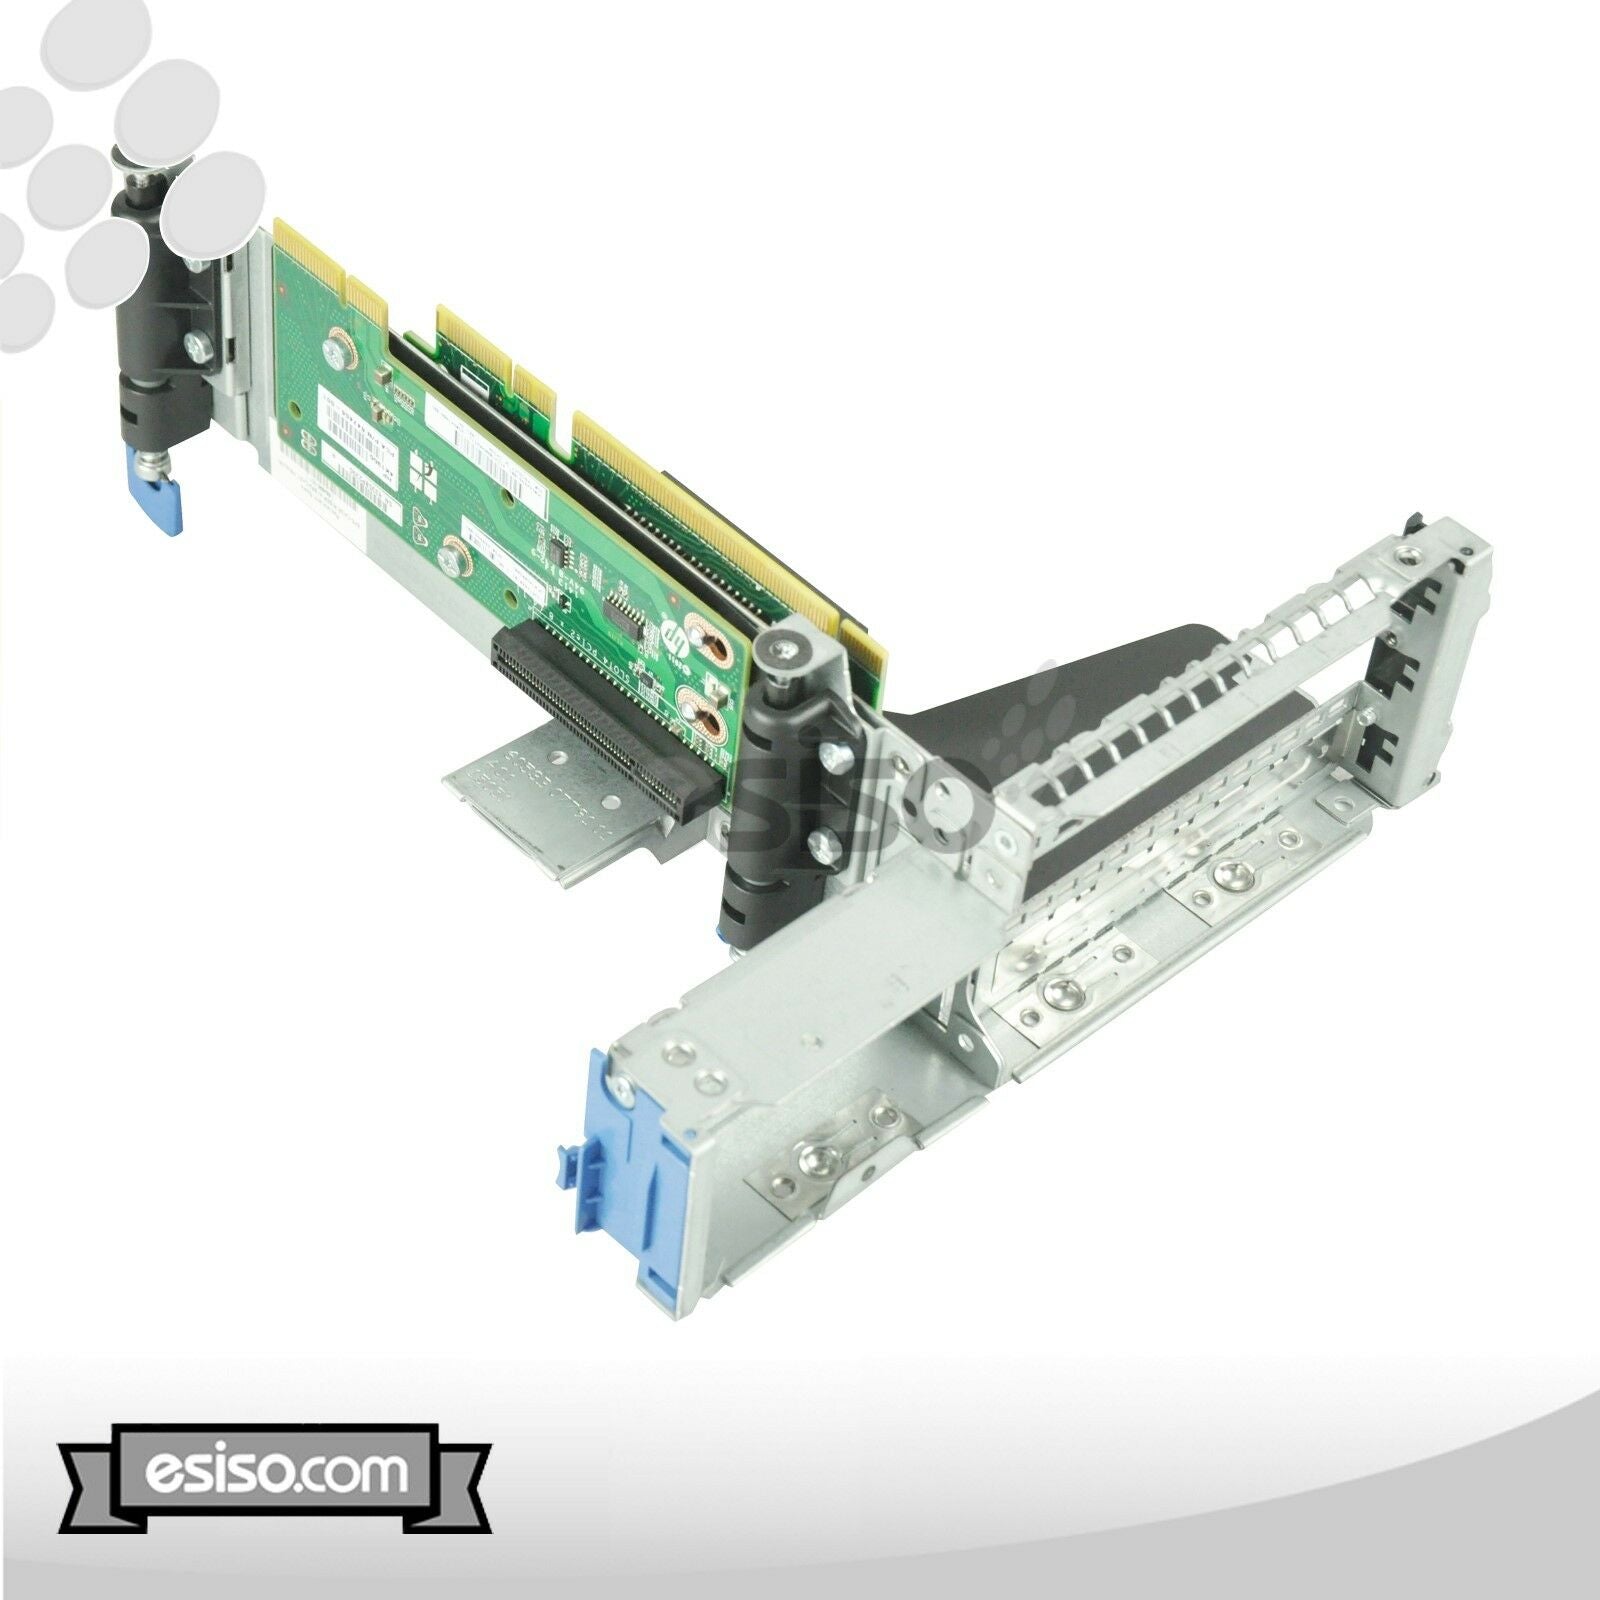 684895-001 HP PCIe PRIMARY RISER CAGE ASSEMBLY FOR PROLIANT DL380e G8 Gen8